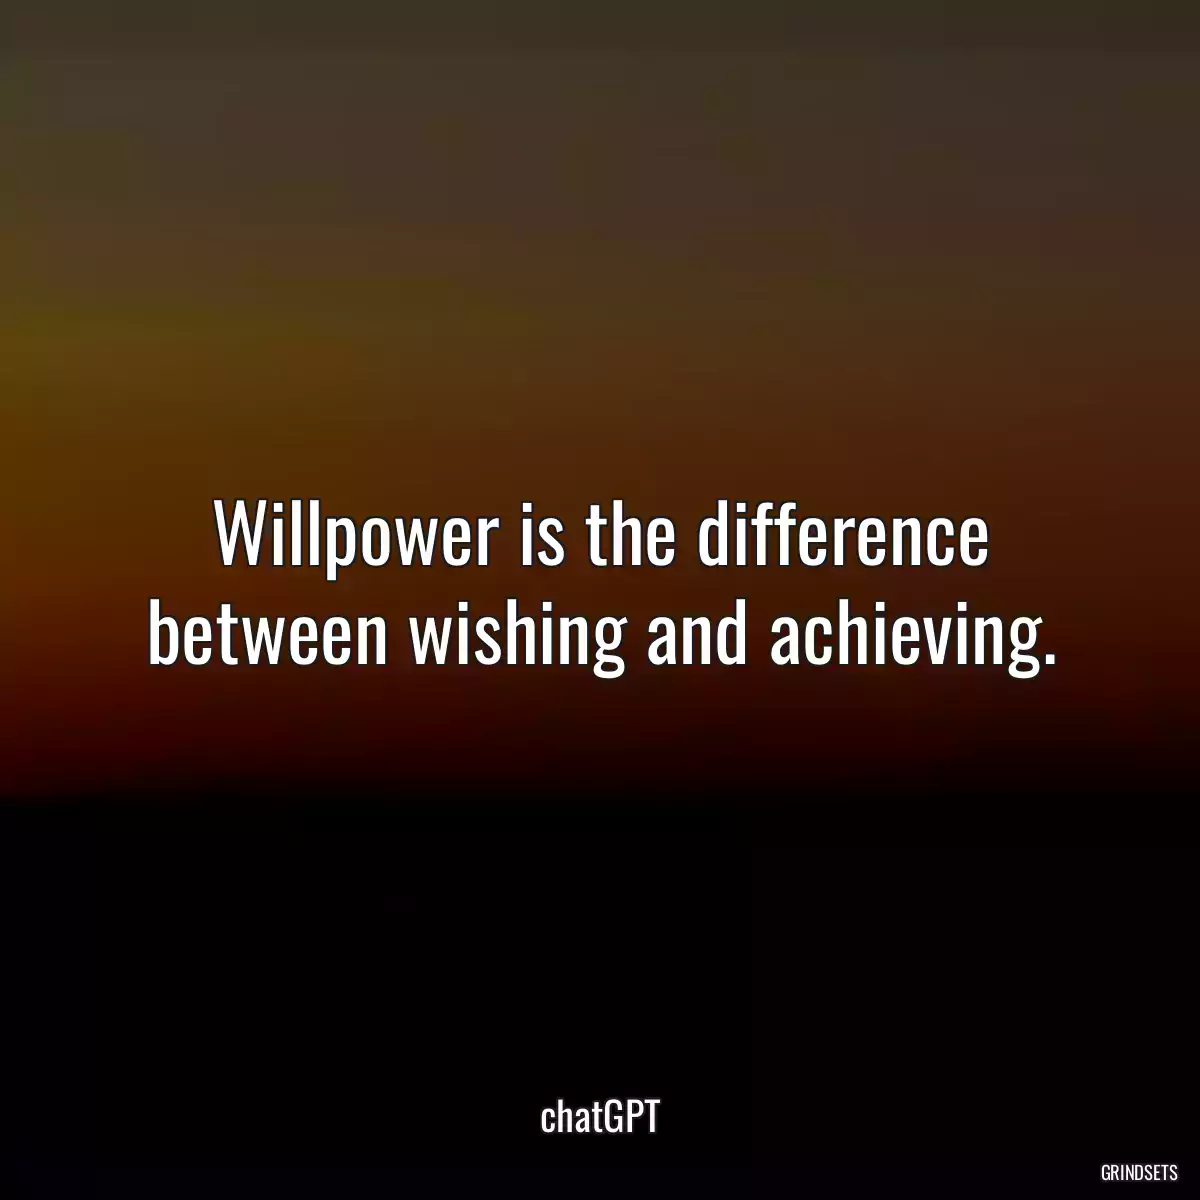 Willpower is the difference between wishing and achieving.